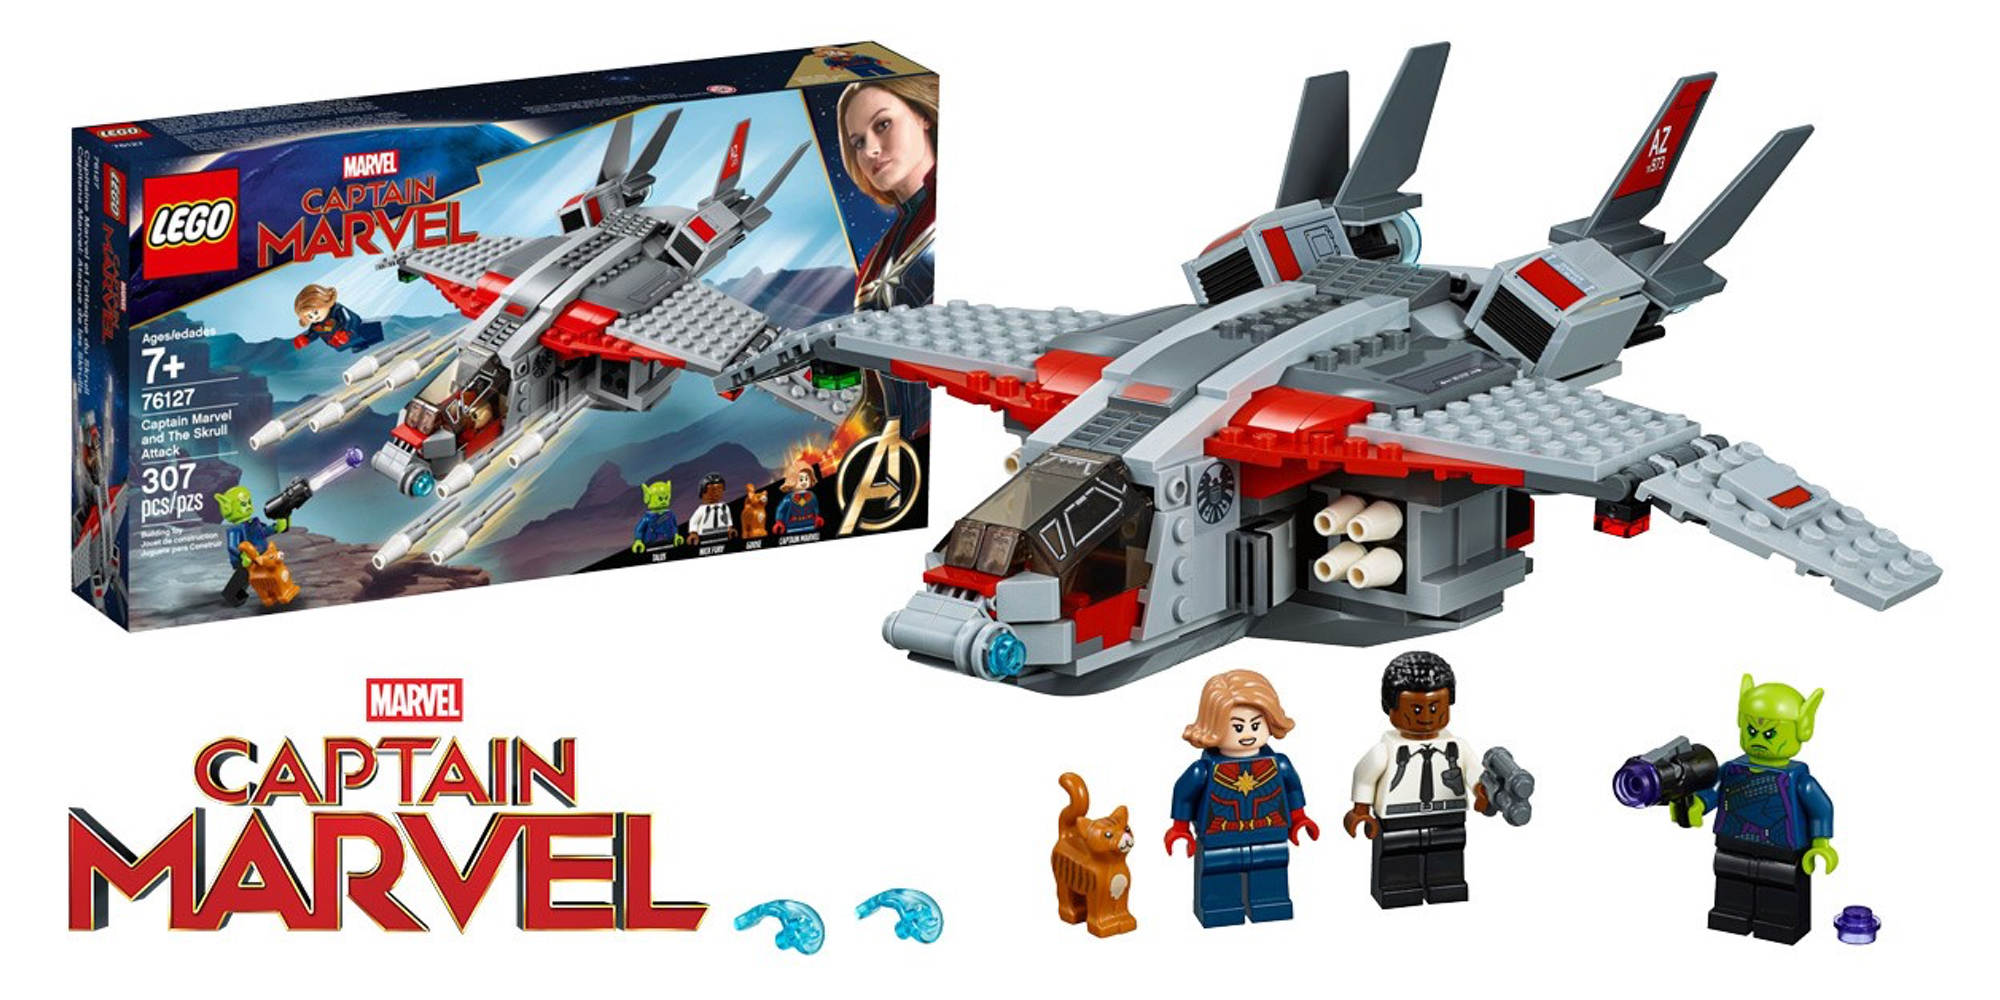 LEGO's first Captain Marvel set is here, with over 300